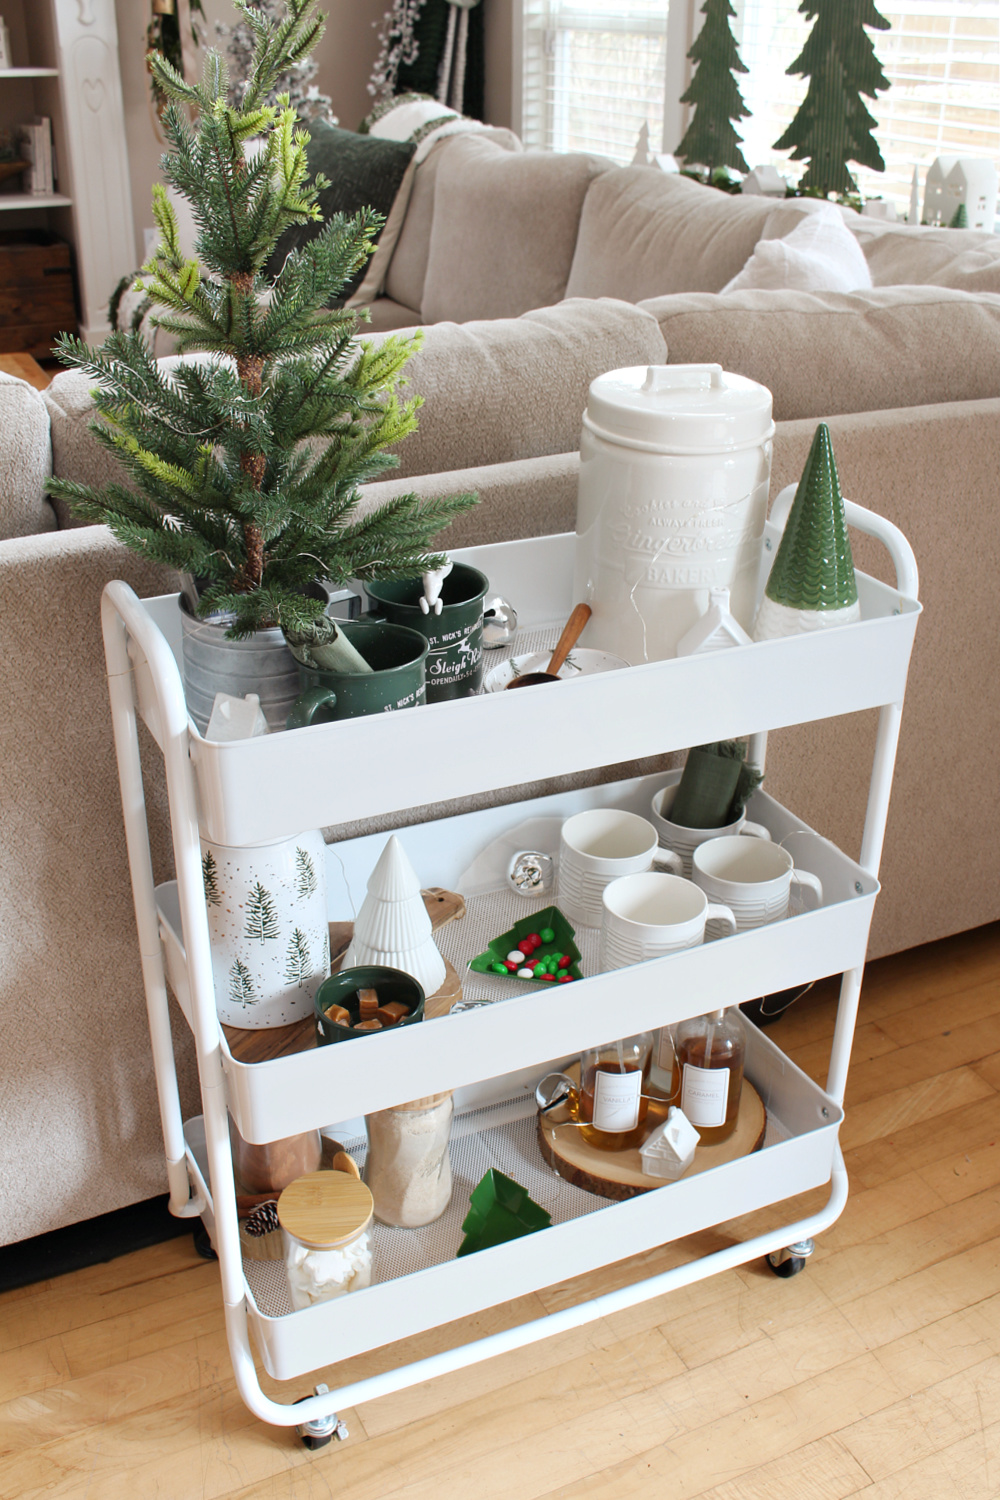 Hot chocolate bar cart decorated with green and white.